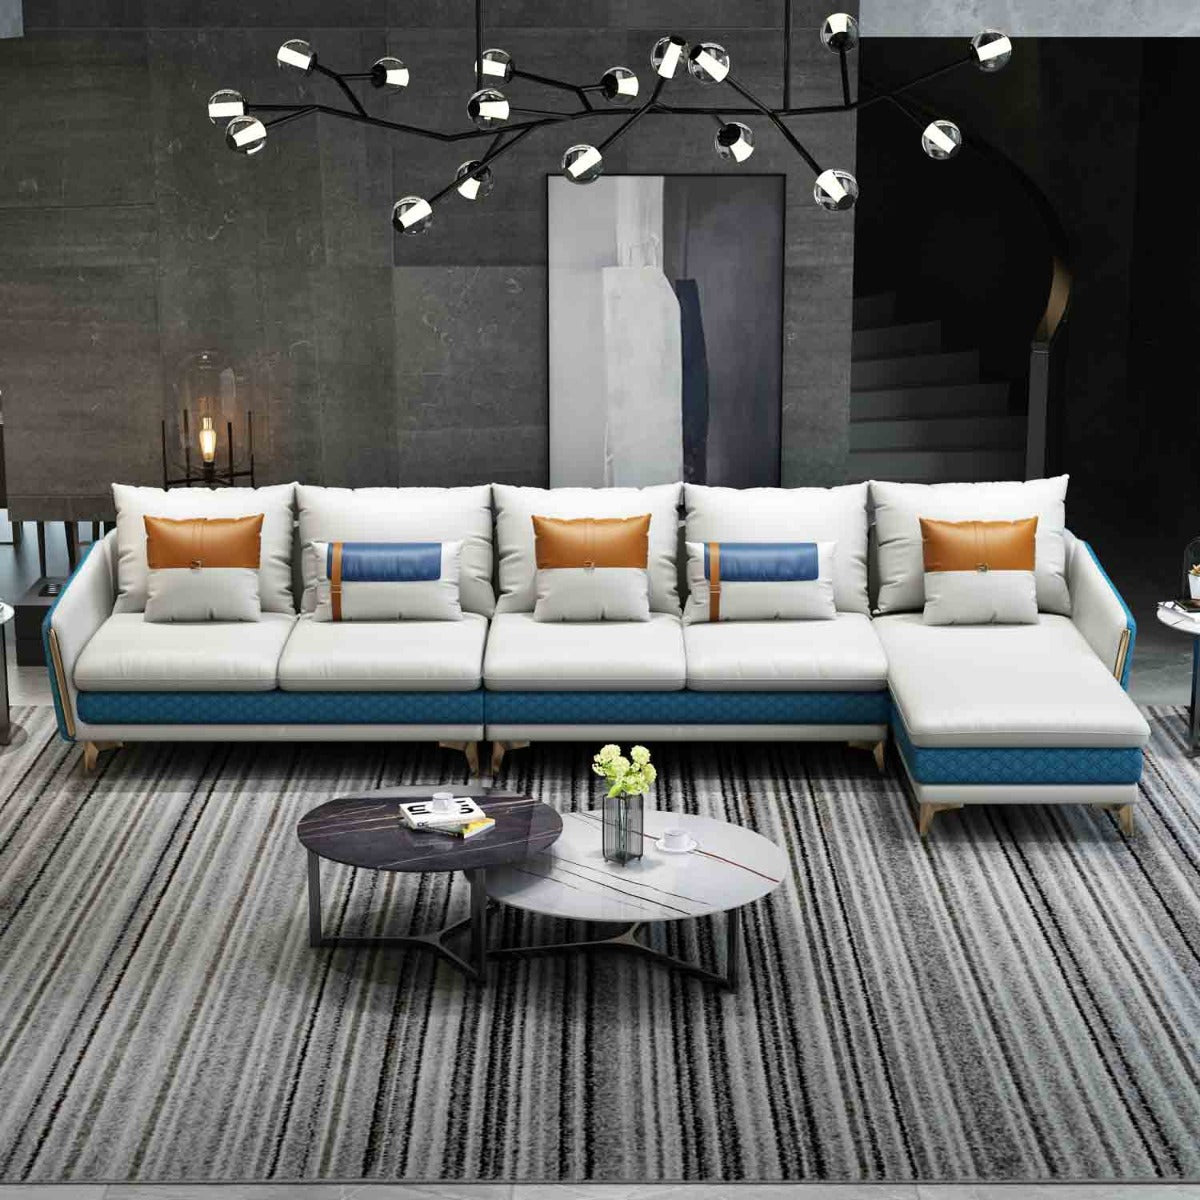 European Furniture - Icaro Mansion Sectional in Italian Leather Off White-Blue - 64439R-5RHF - New Star Living